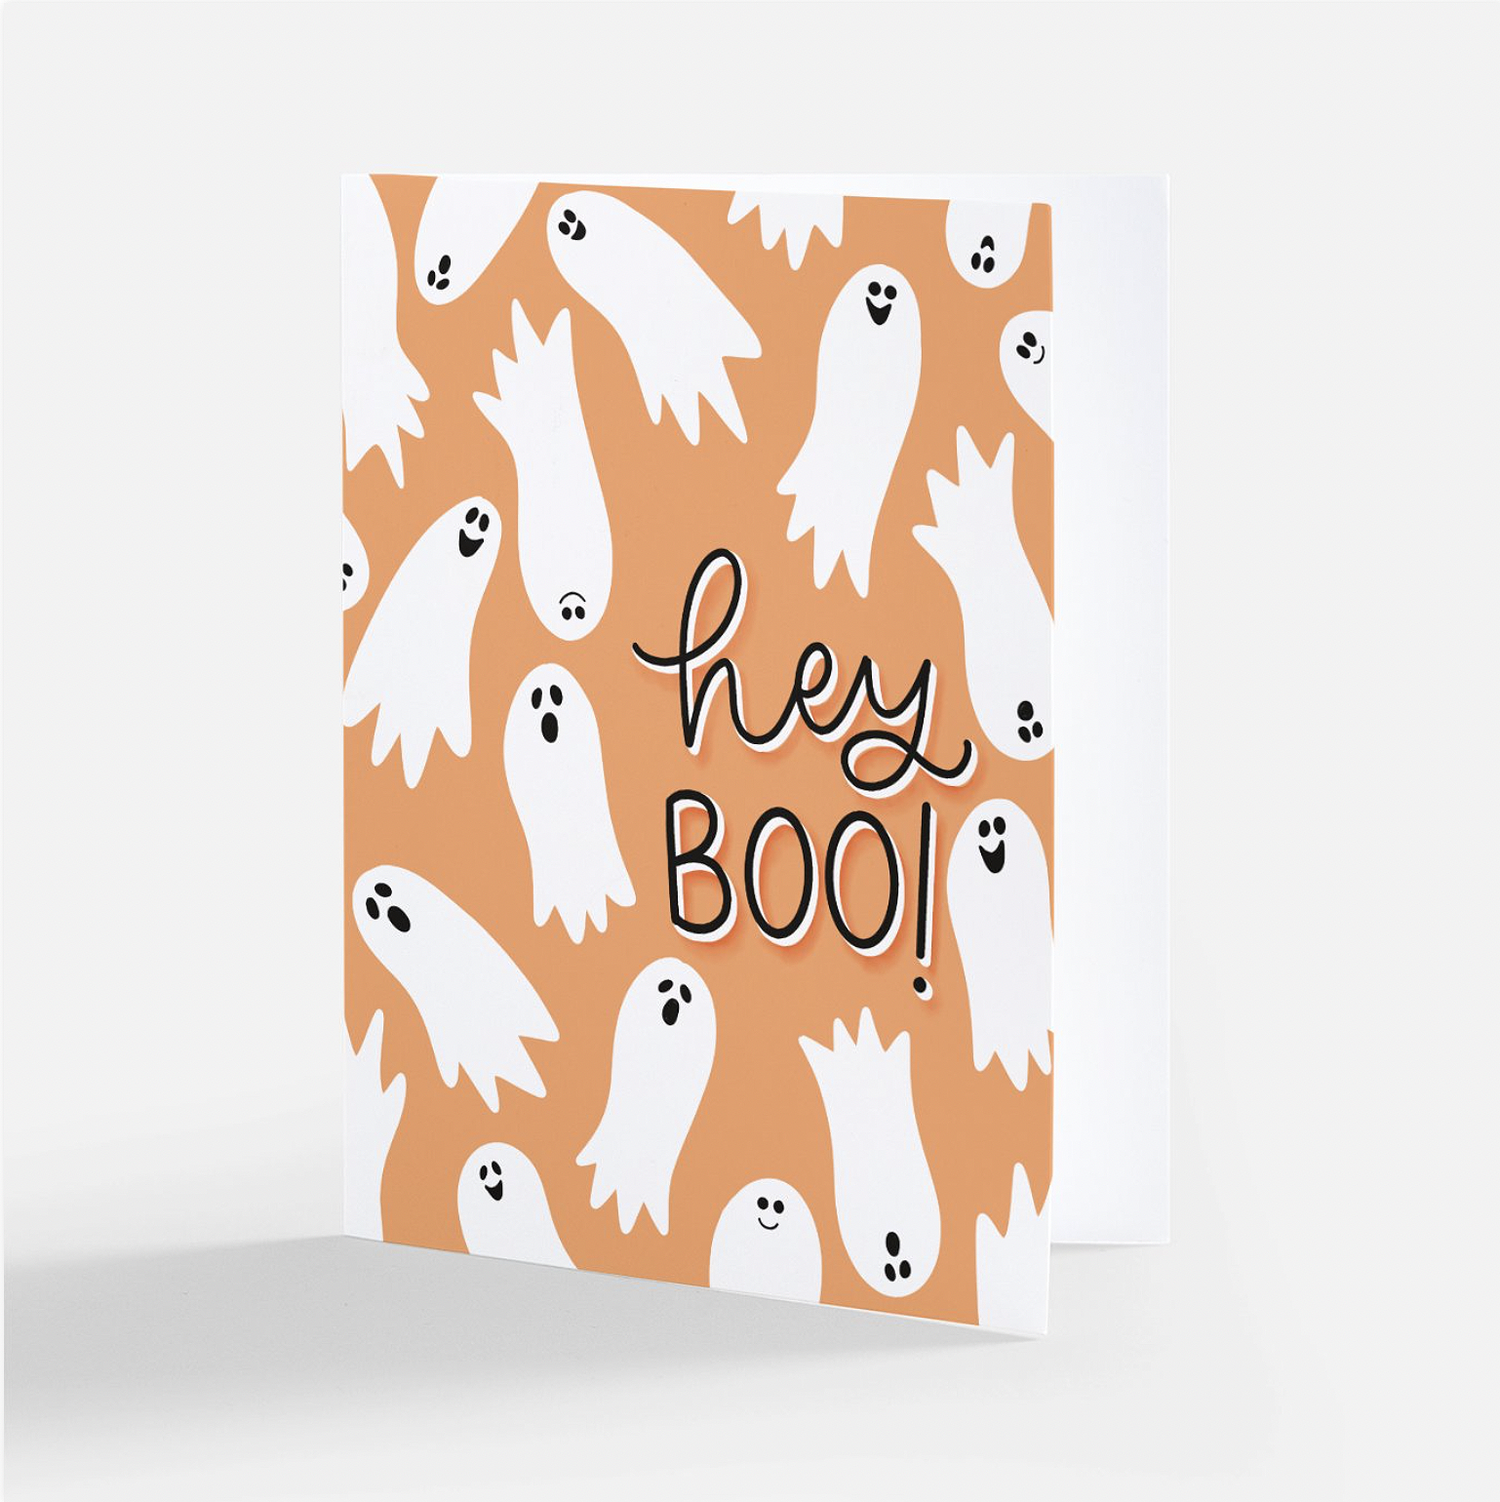 hey boo. greeting card. smiling ghost. floating ghost. Halloween greeting card. Best friend card. spooky season. fall greeting card. Blank inside. A2 size. envelope include. hand drawn. illustration. made by katie belle co. 